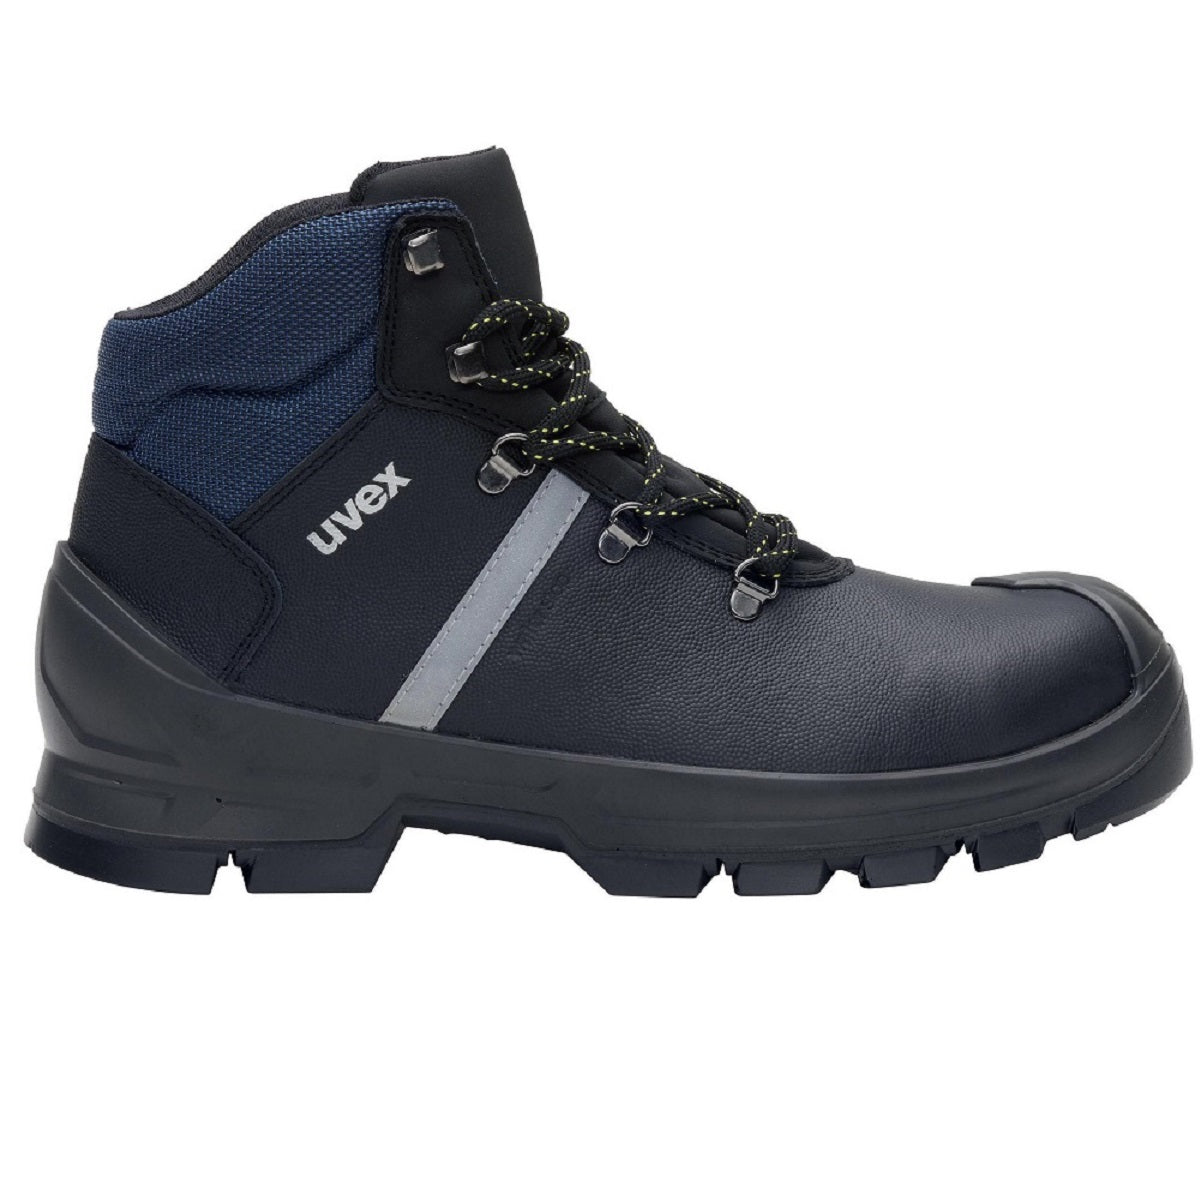 65122 uvex 2 construction leather industrial safety boots S3 SRC protexu side view